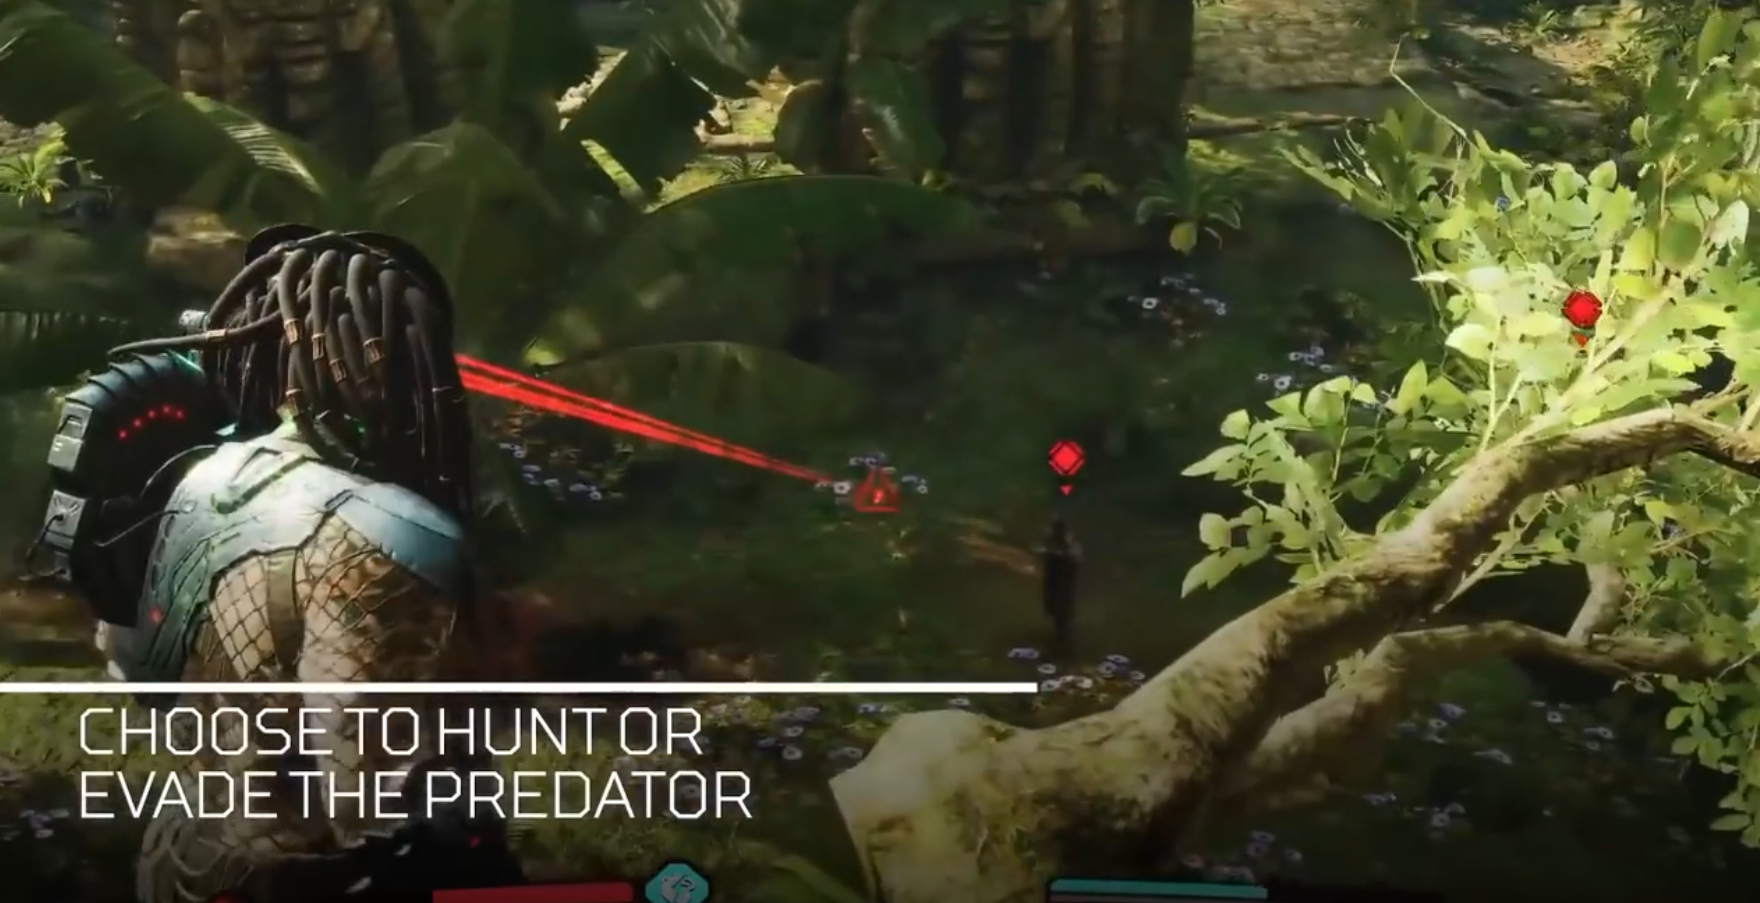 Predator: Hunting Grounds Has A New Trailer Out Now That Shows More Of The Fireteam